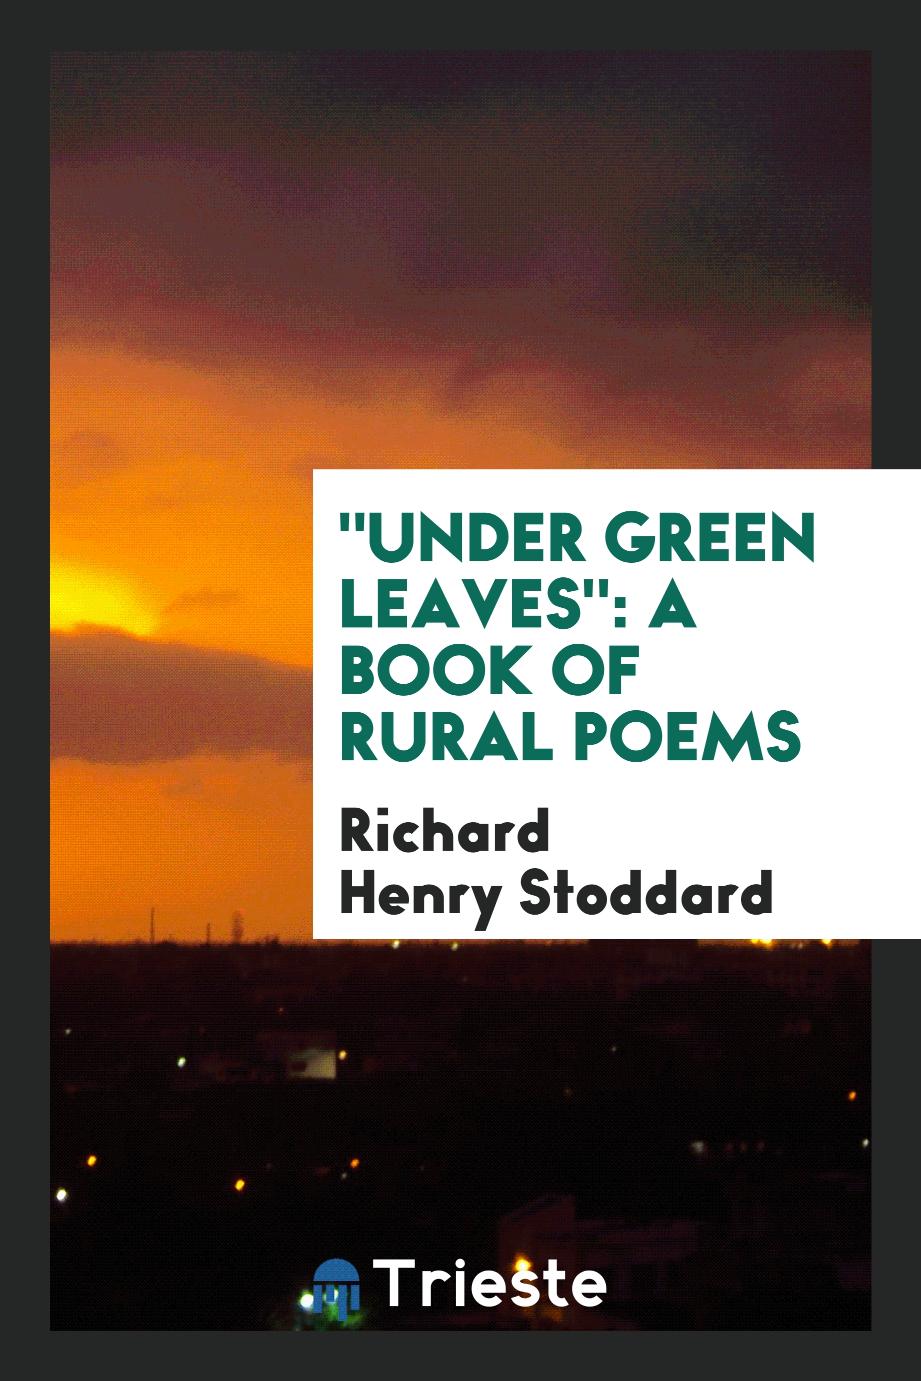 "Under Green Leaves": A Book of Rural Poems